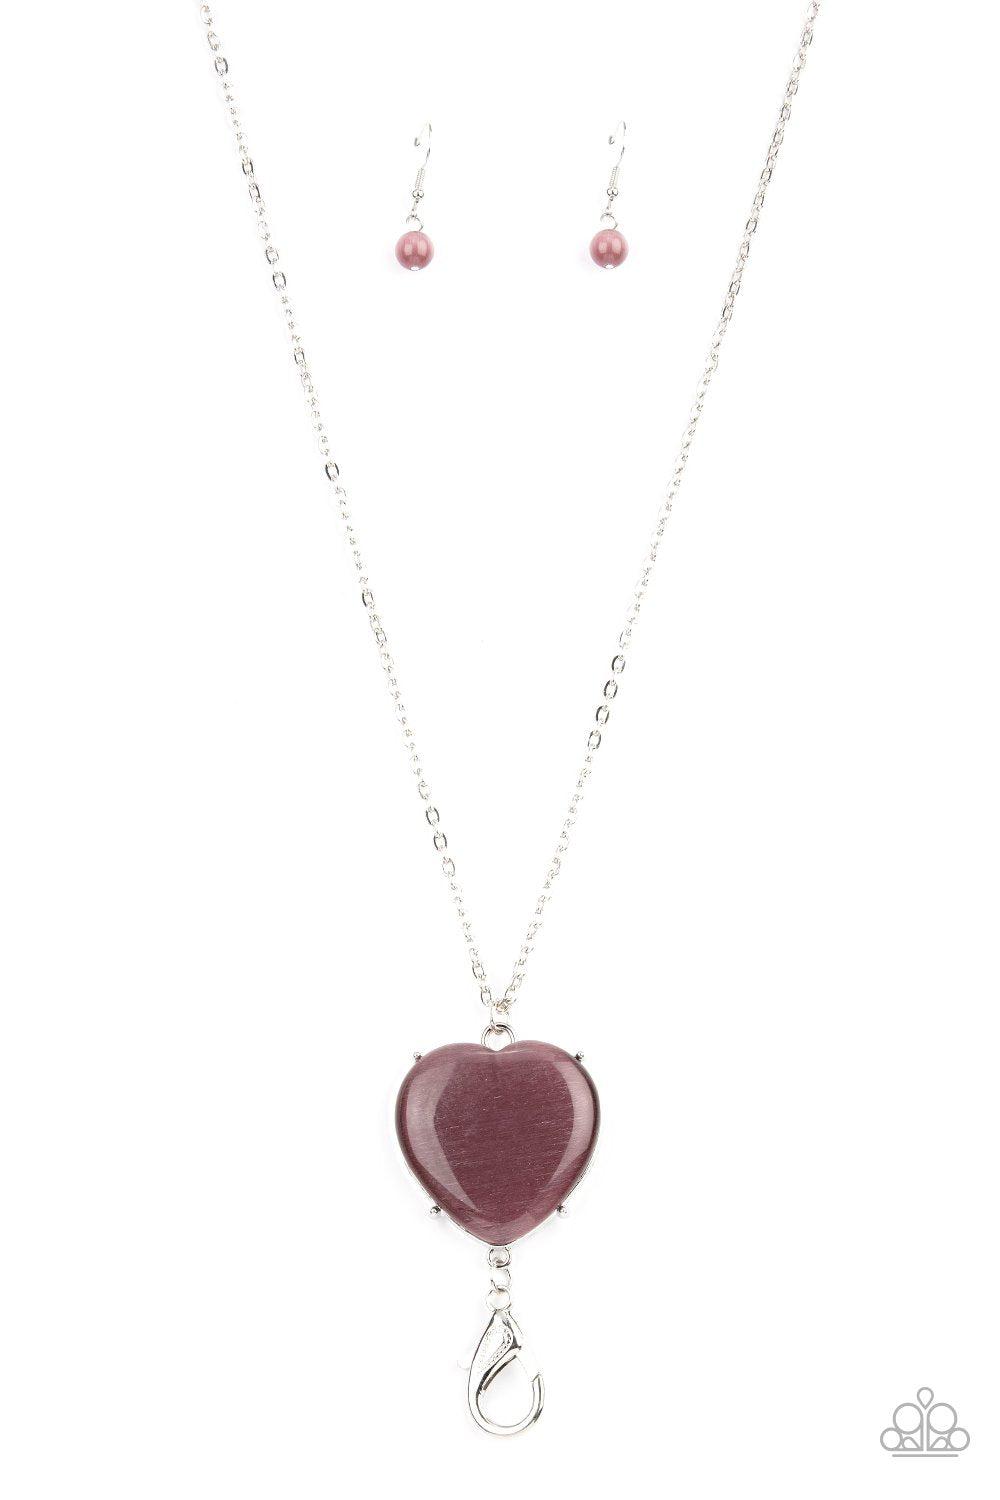 Warmhearted Glow Purple Cat's Eye Stone Heart Lanyard Necklace - Paparazzi Accessories- lightbox - CarasShop.com - $5 Jewelry by Cara Jewels